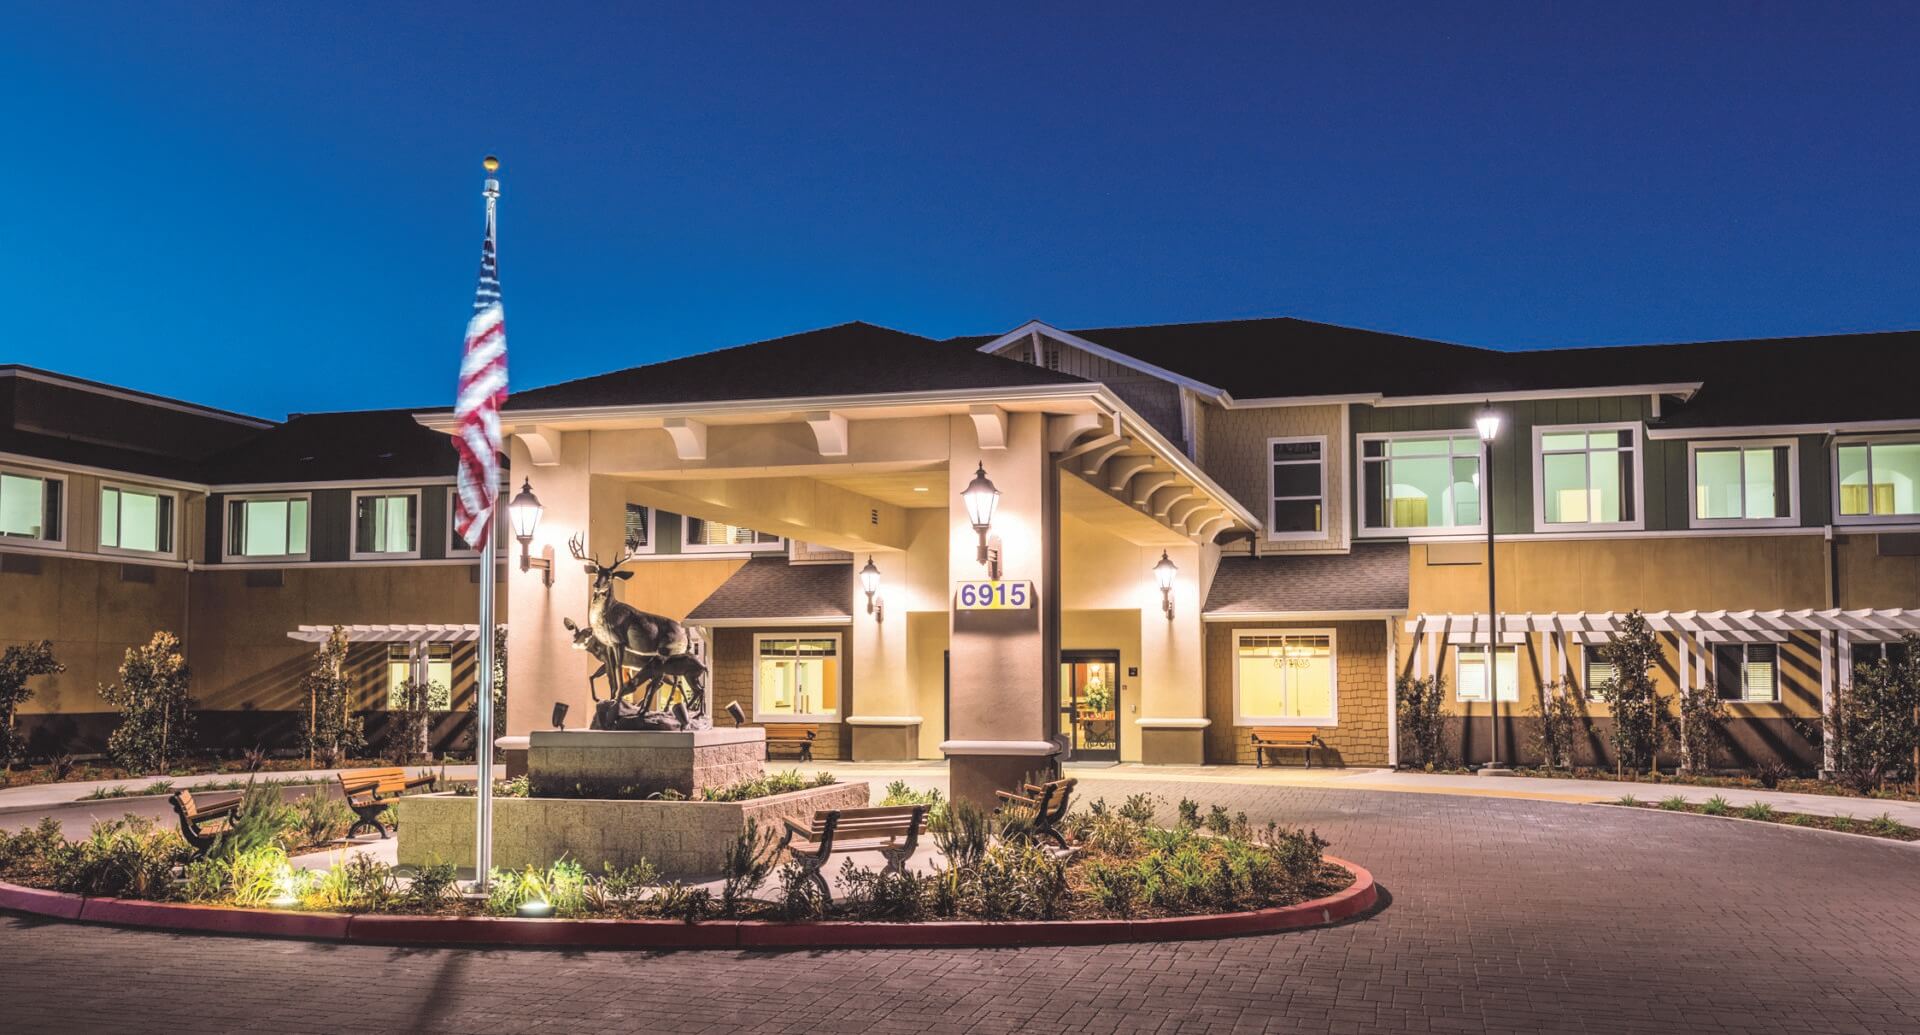 Carlton Senior Living Elk Grove offers Independent Living, Assisted Living and Memory Care